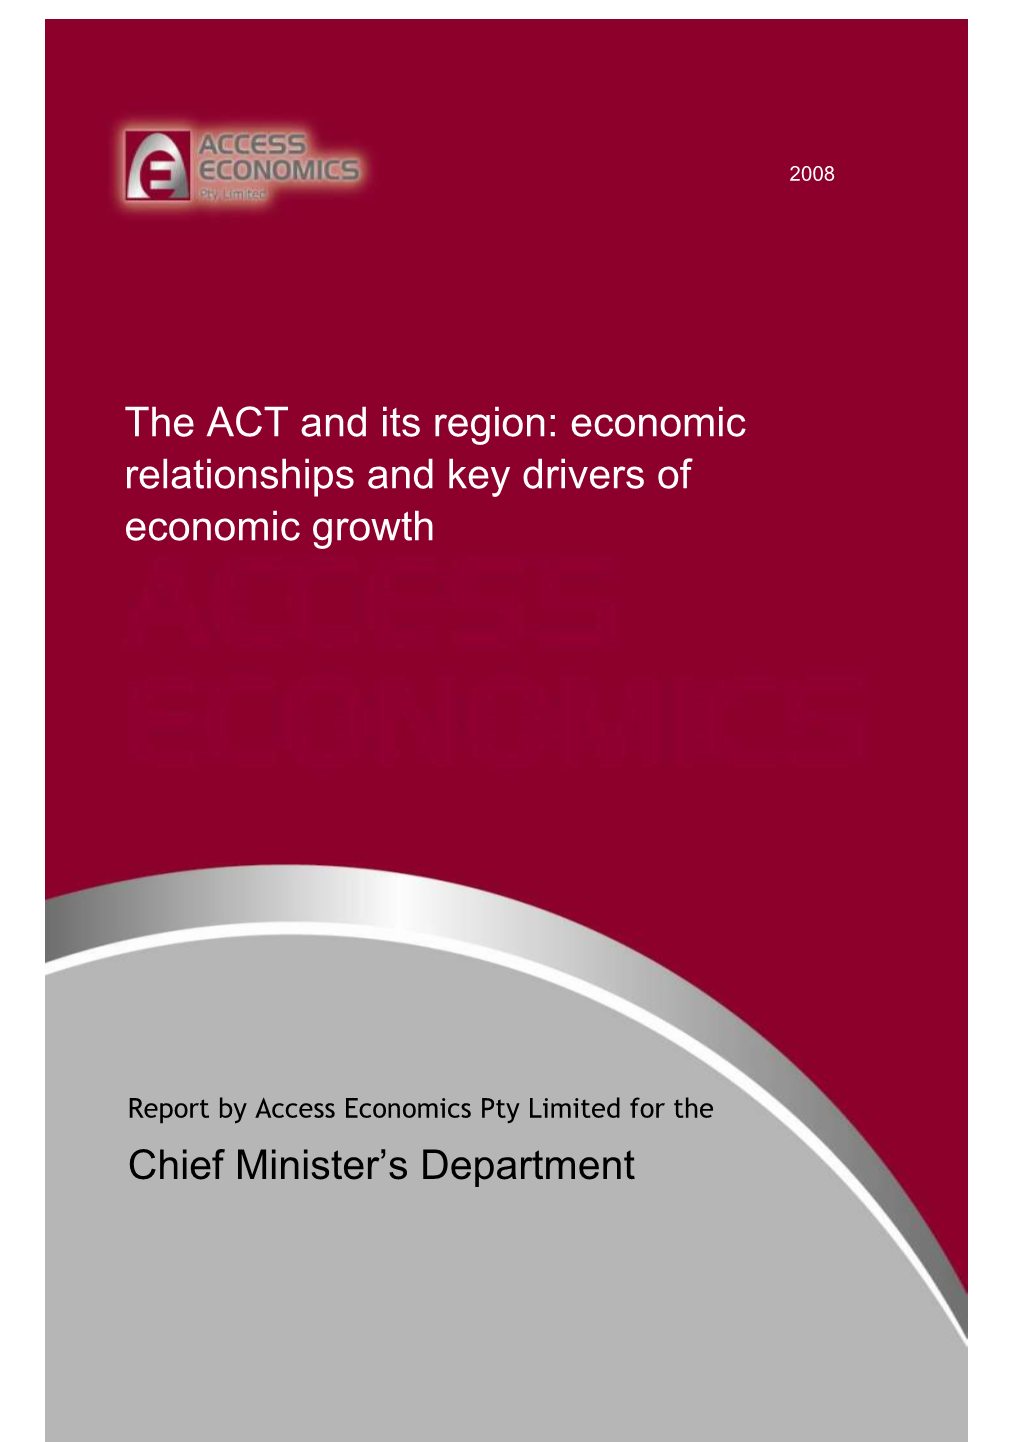 The ACT and Its Region: Economic Relationships and Key Drivers of Economic Growth